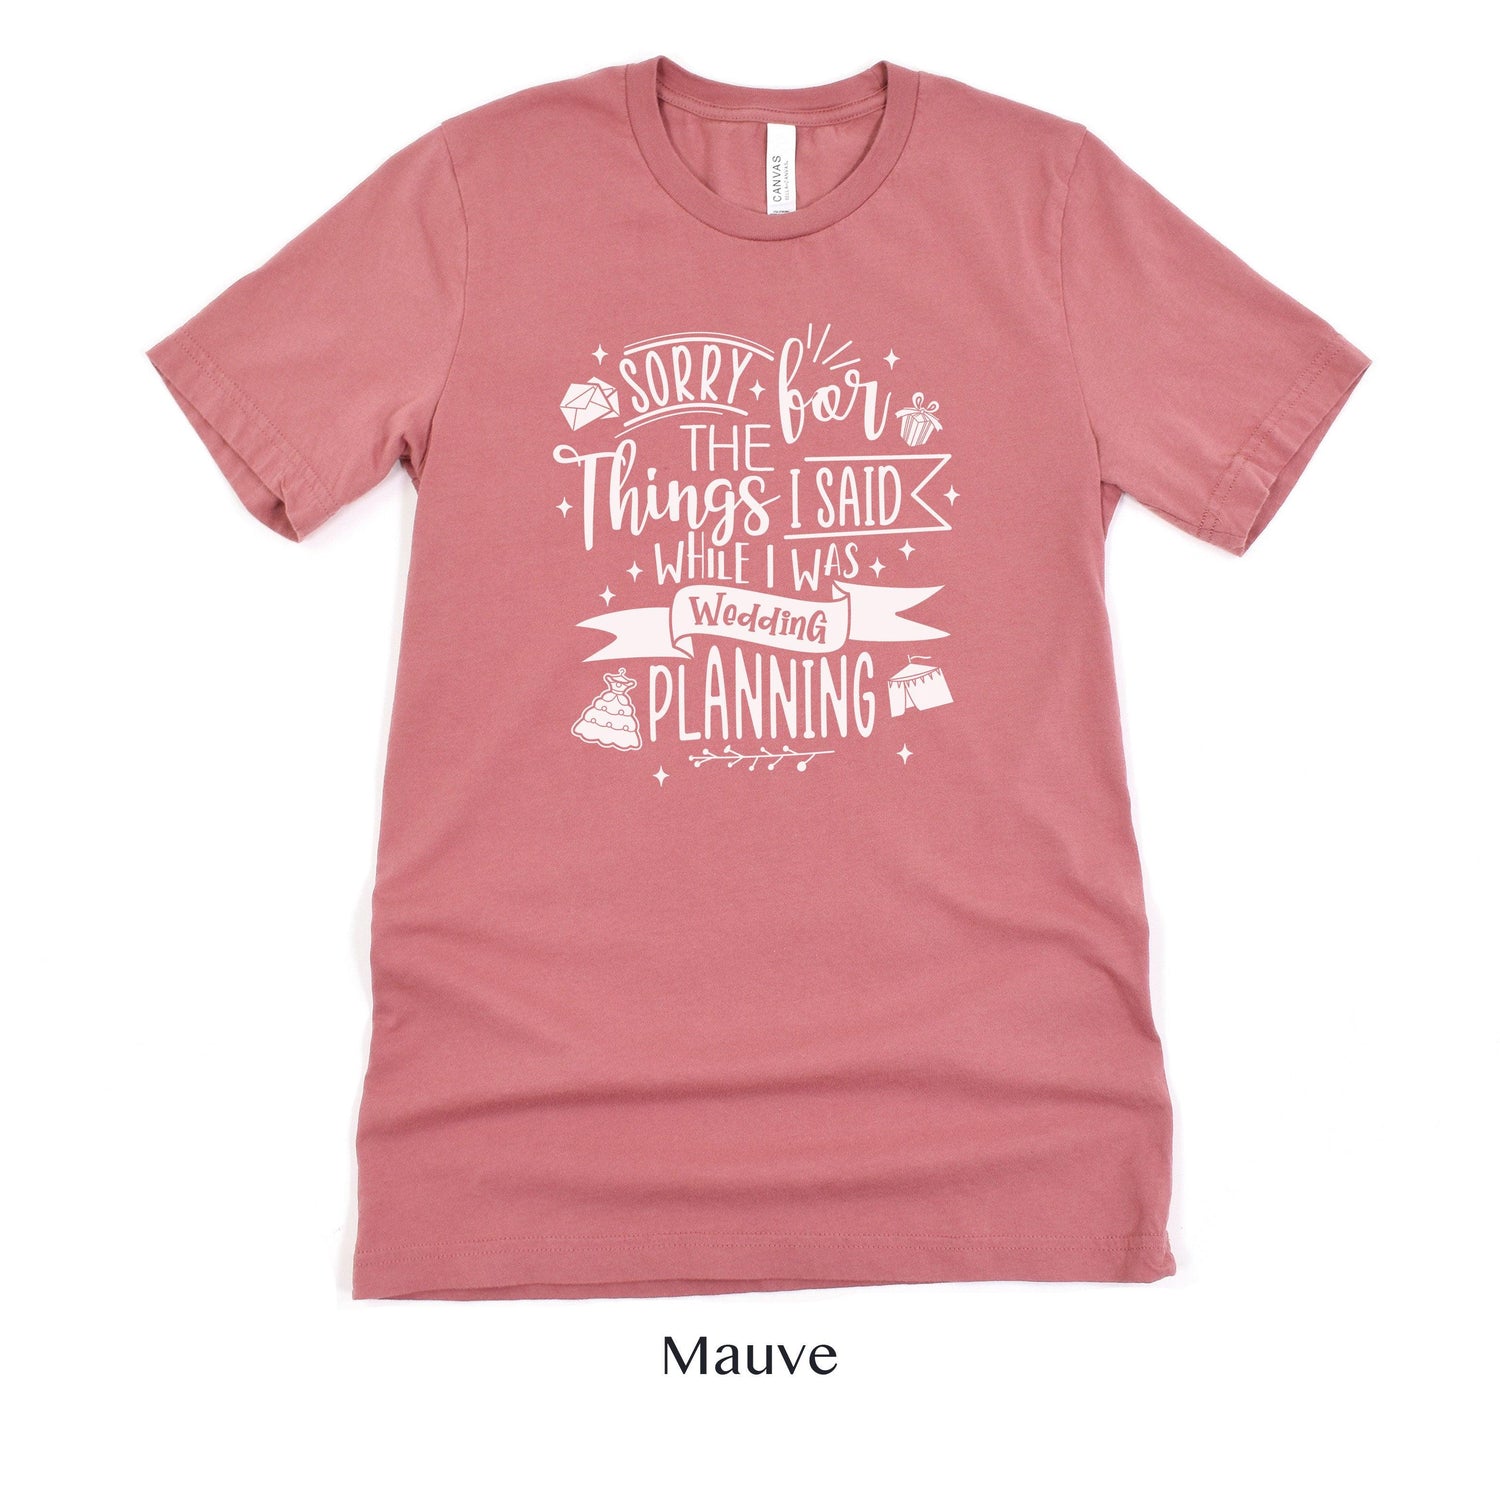 Sorry for the Things I said Wedding Planning - Bride to Be - Wedding Planner Event Coordinator Shirt by Oaklynn Lane